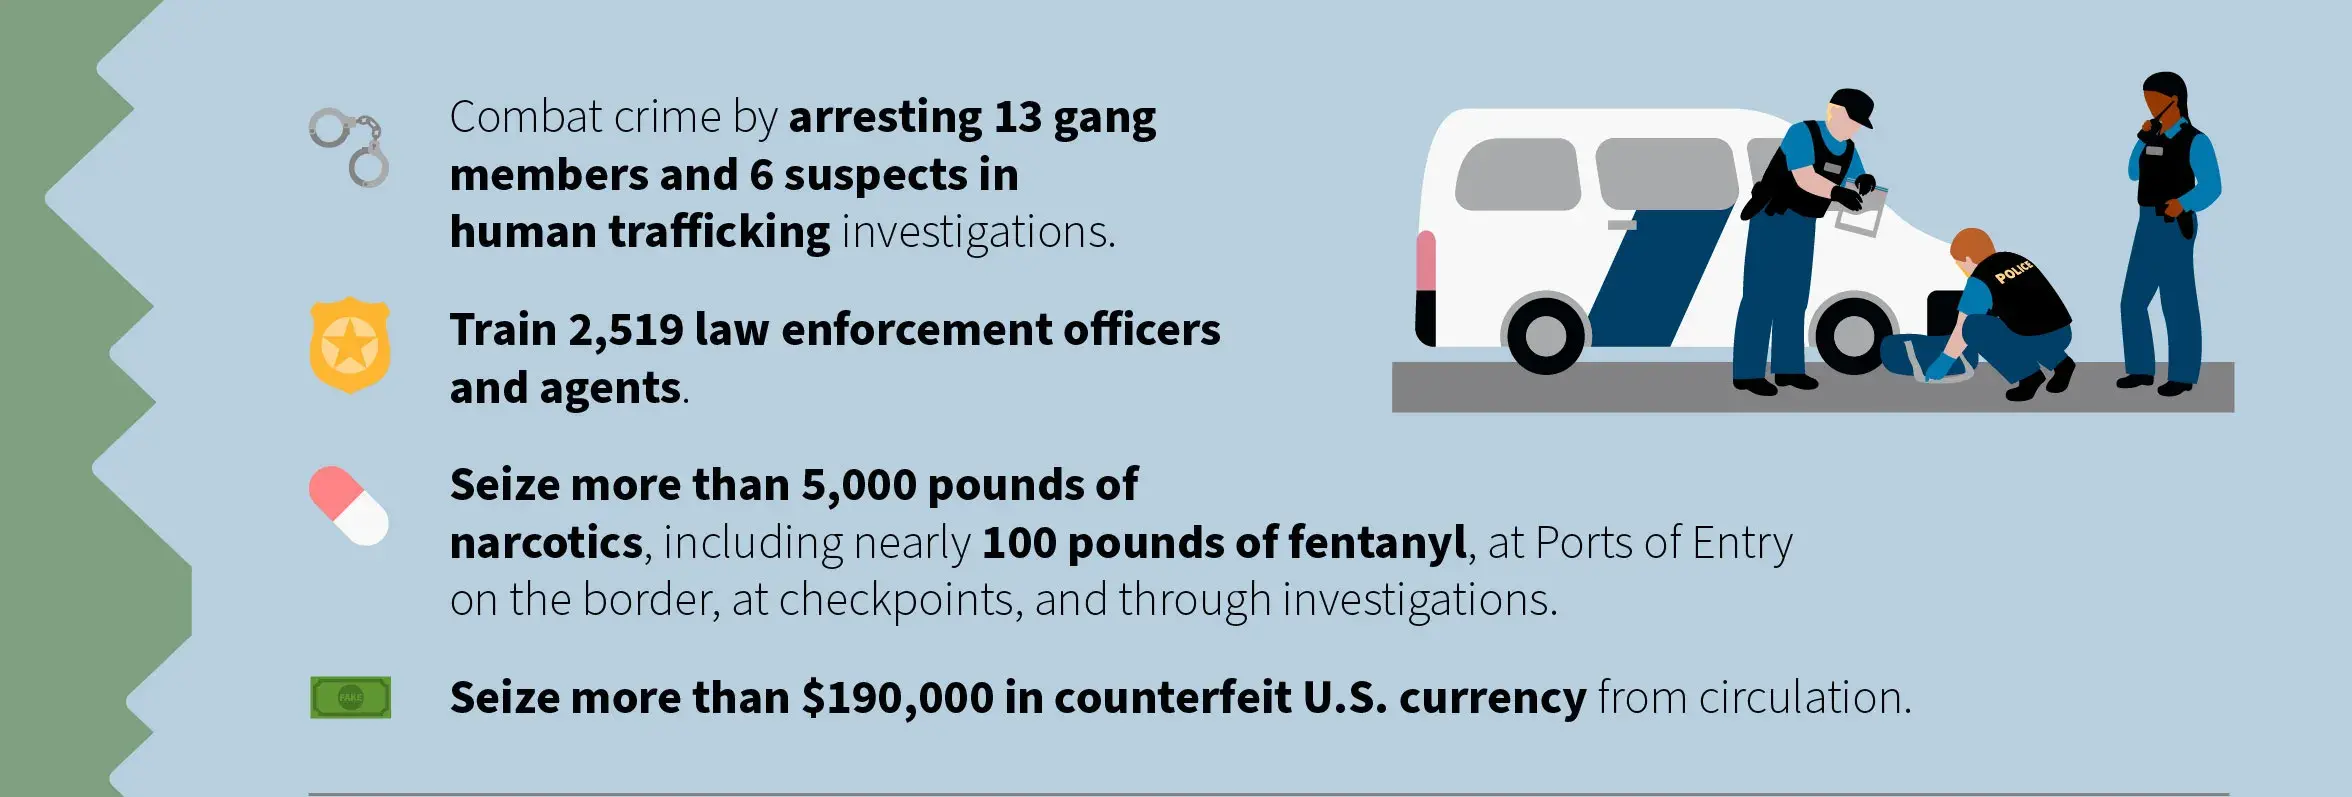 Combat crime by arresting 13 gang members and 6 suspects in human trafficking investigations. Train 2,519 law enforcement officers and agents. Seize more than 5,000 pounds of narcotics, including nearly 100 pounds of fentanyl, at Ports of Entry on the border, at checkpoints, and through investigations. Seize more than $190,000 in counterfeit US currency from circulation.